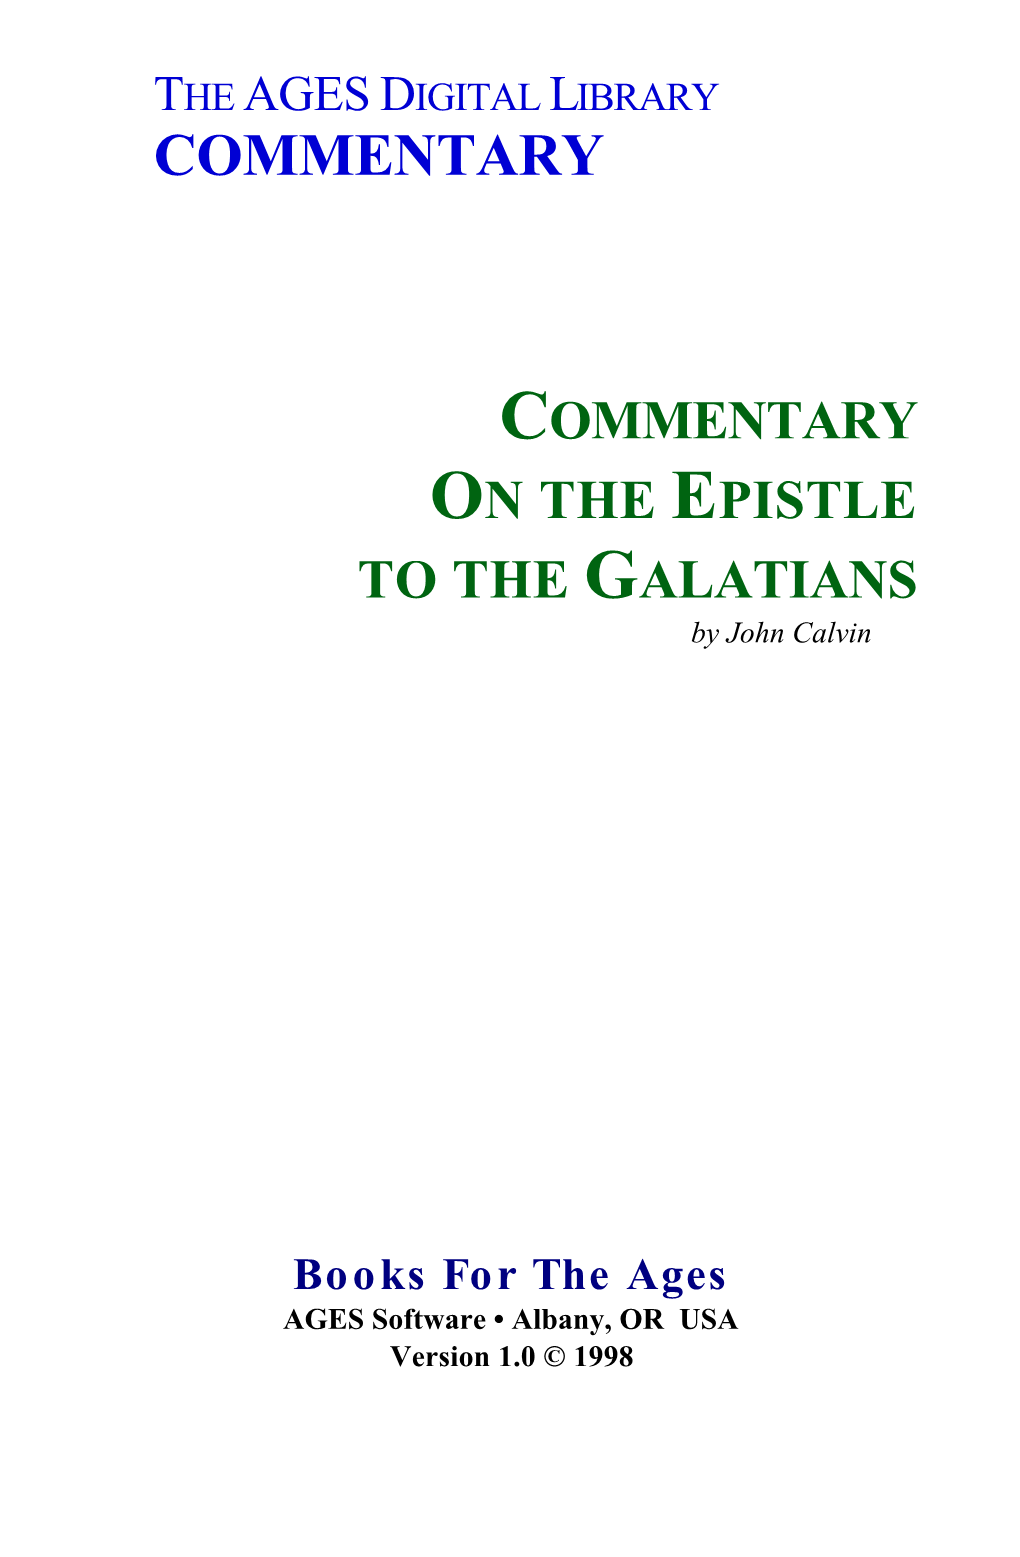 COMMENTARY on the EPISTLE to the GALATIANS by John Calvin